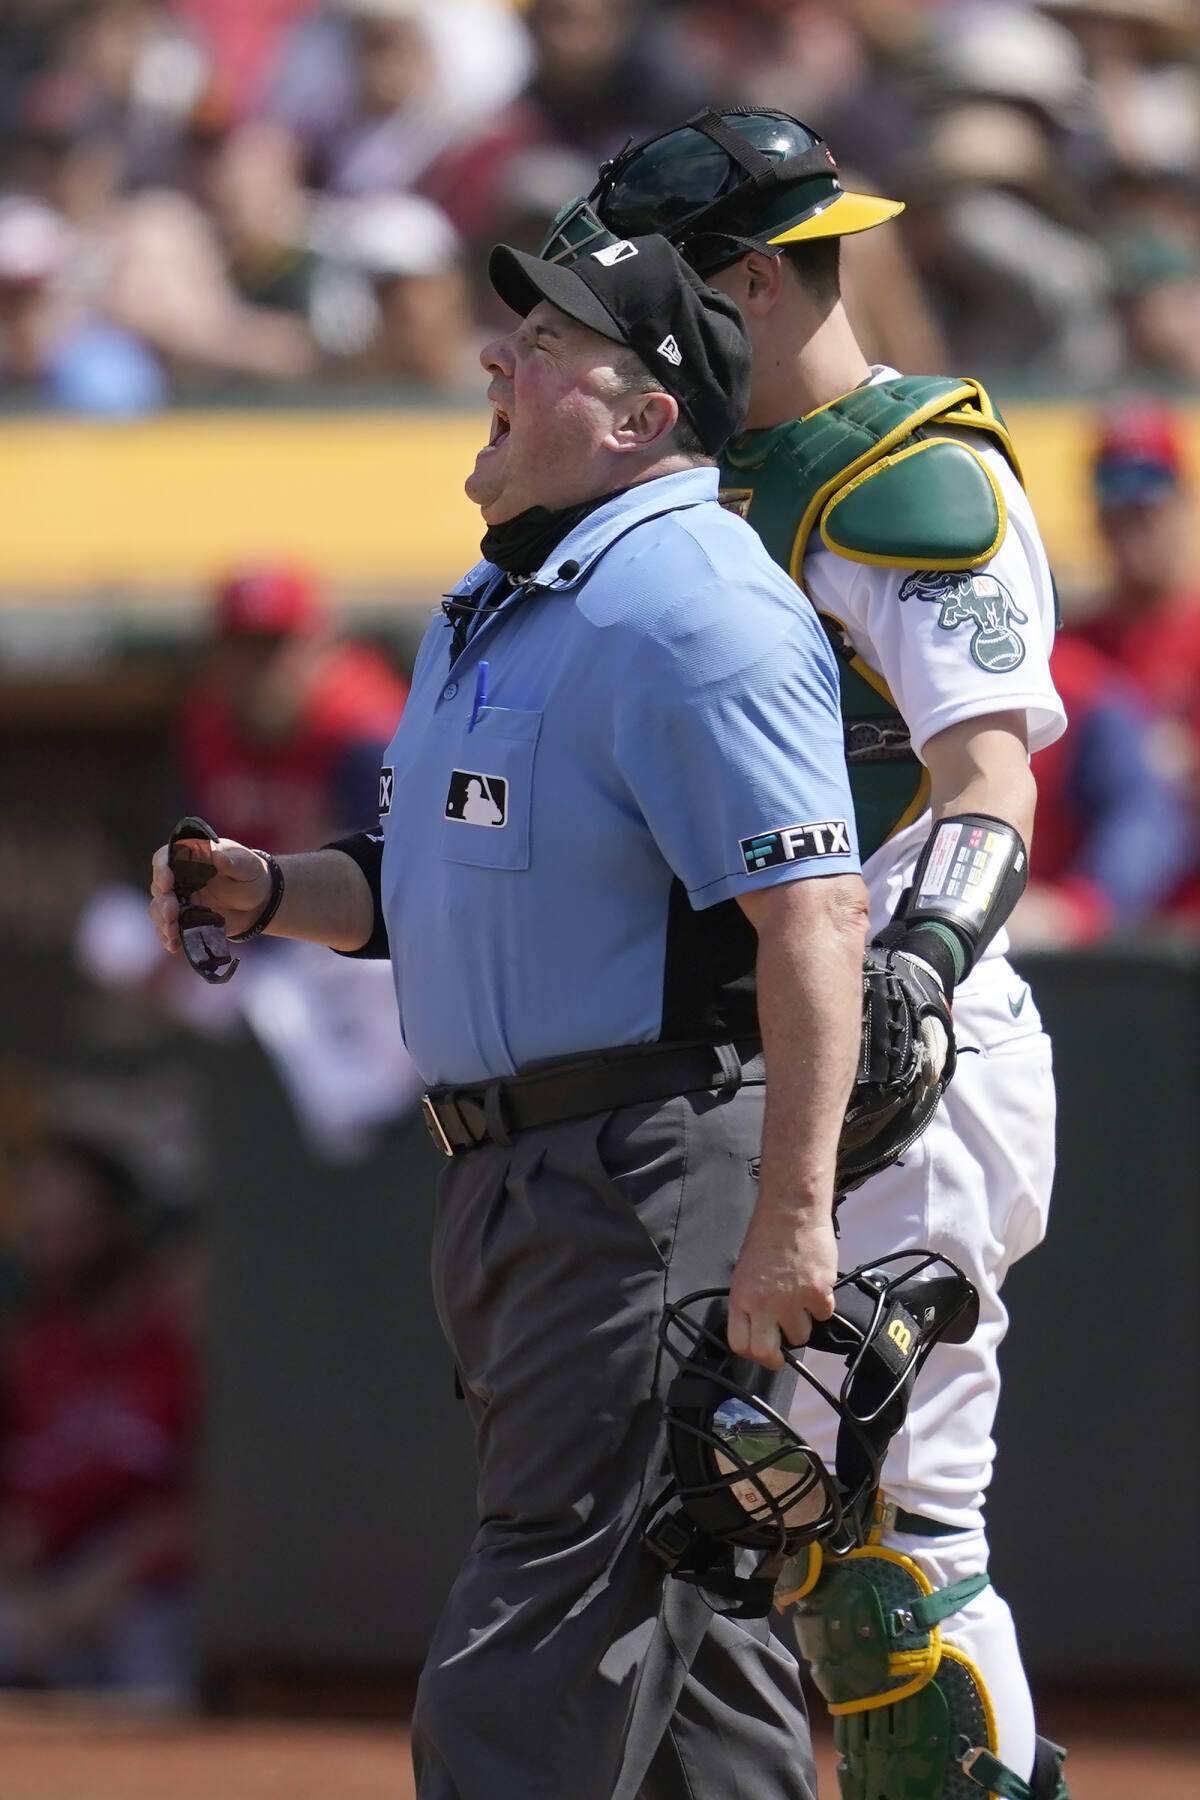 Plate umpire leaves A's-Angels game after getting hit twice